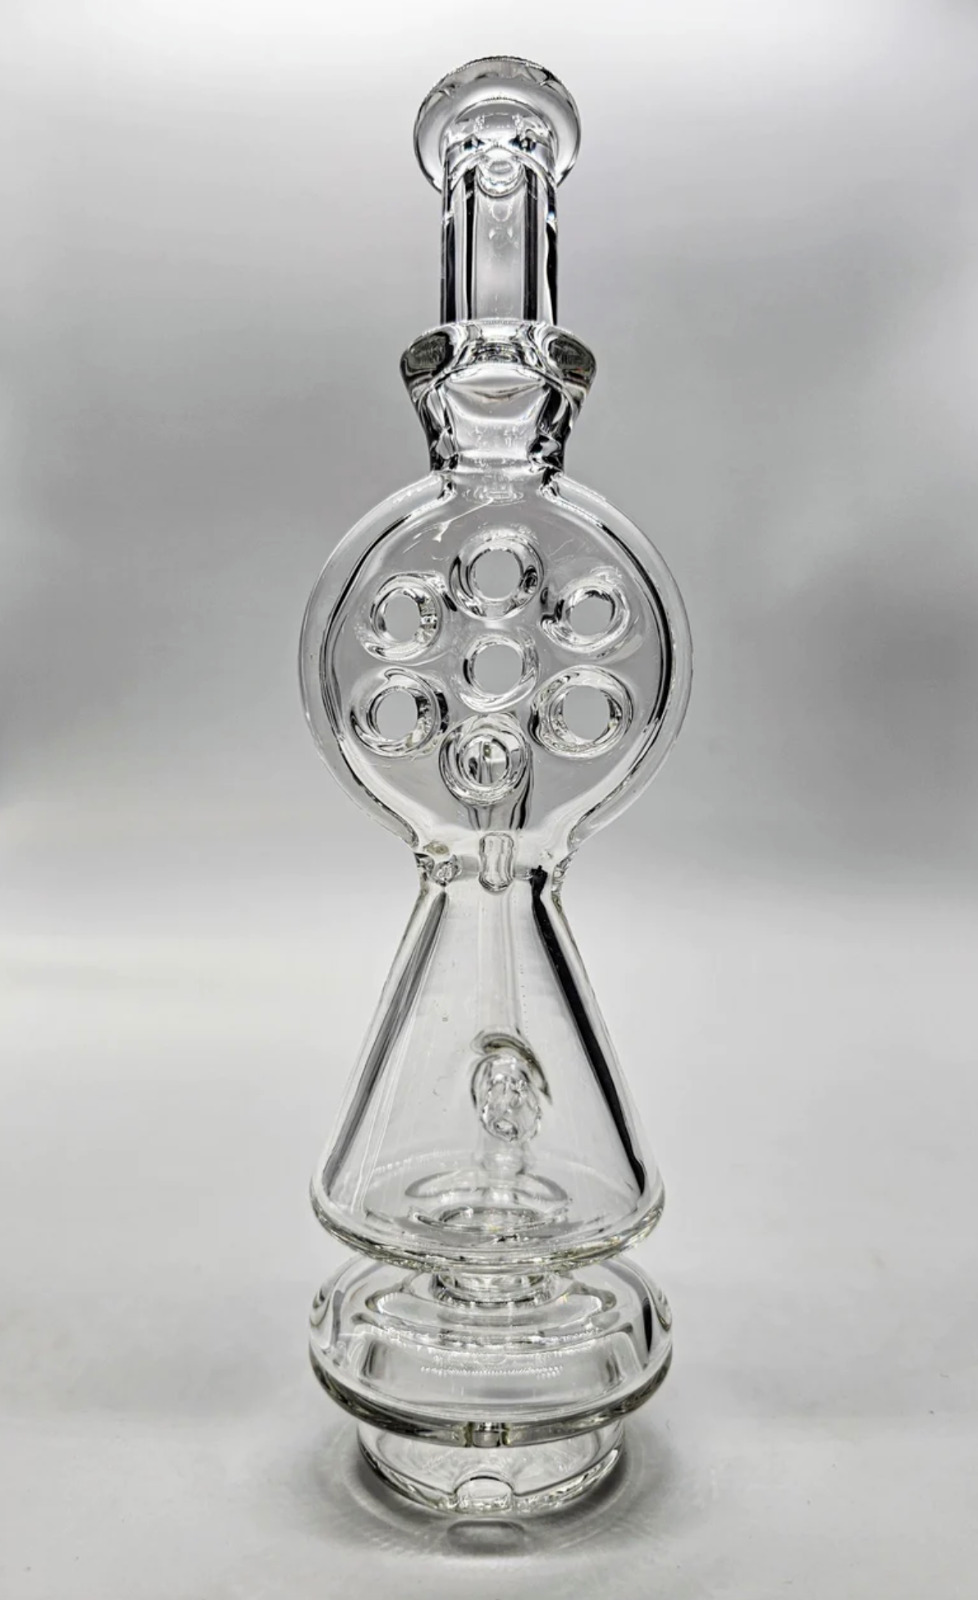 Focus V Carta Swiss Honeycomb Glass Attachment Collectible Tobacco Water Pipe